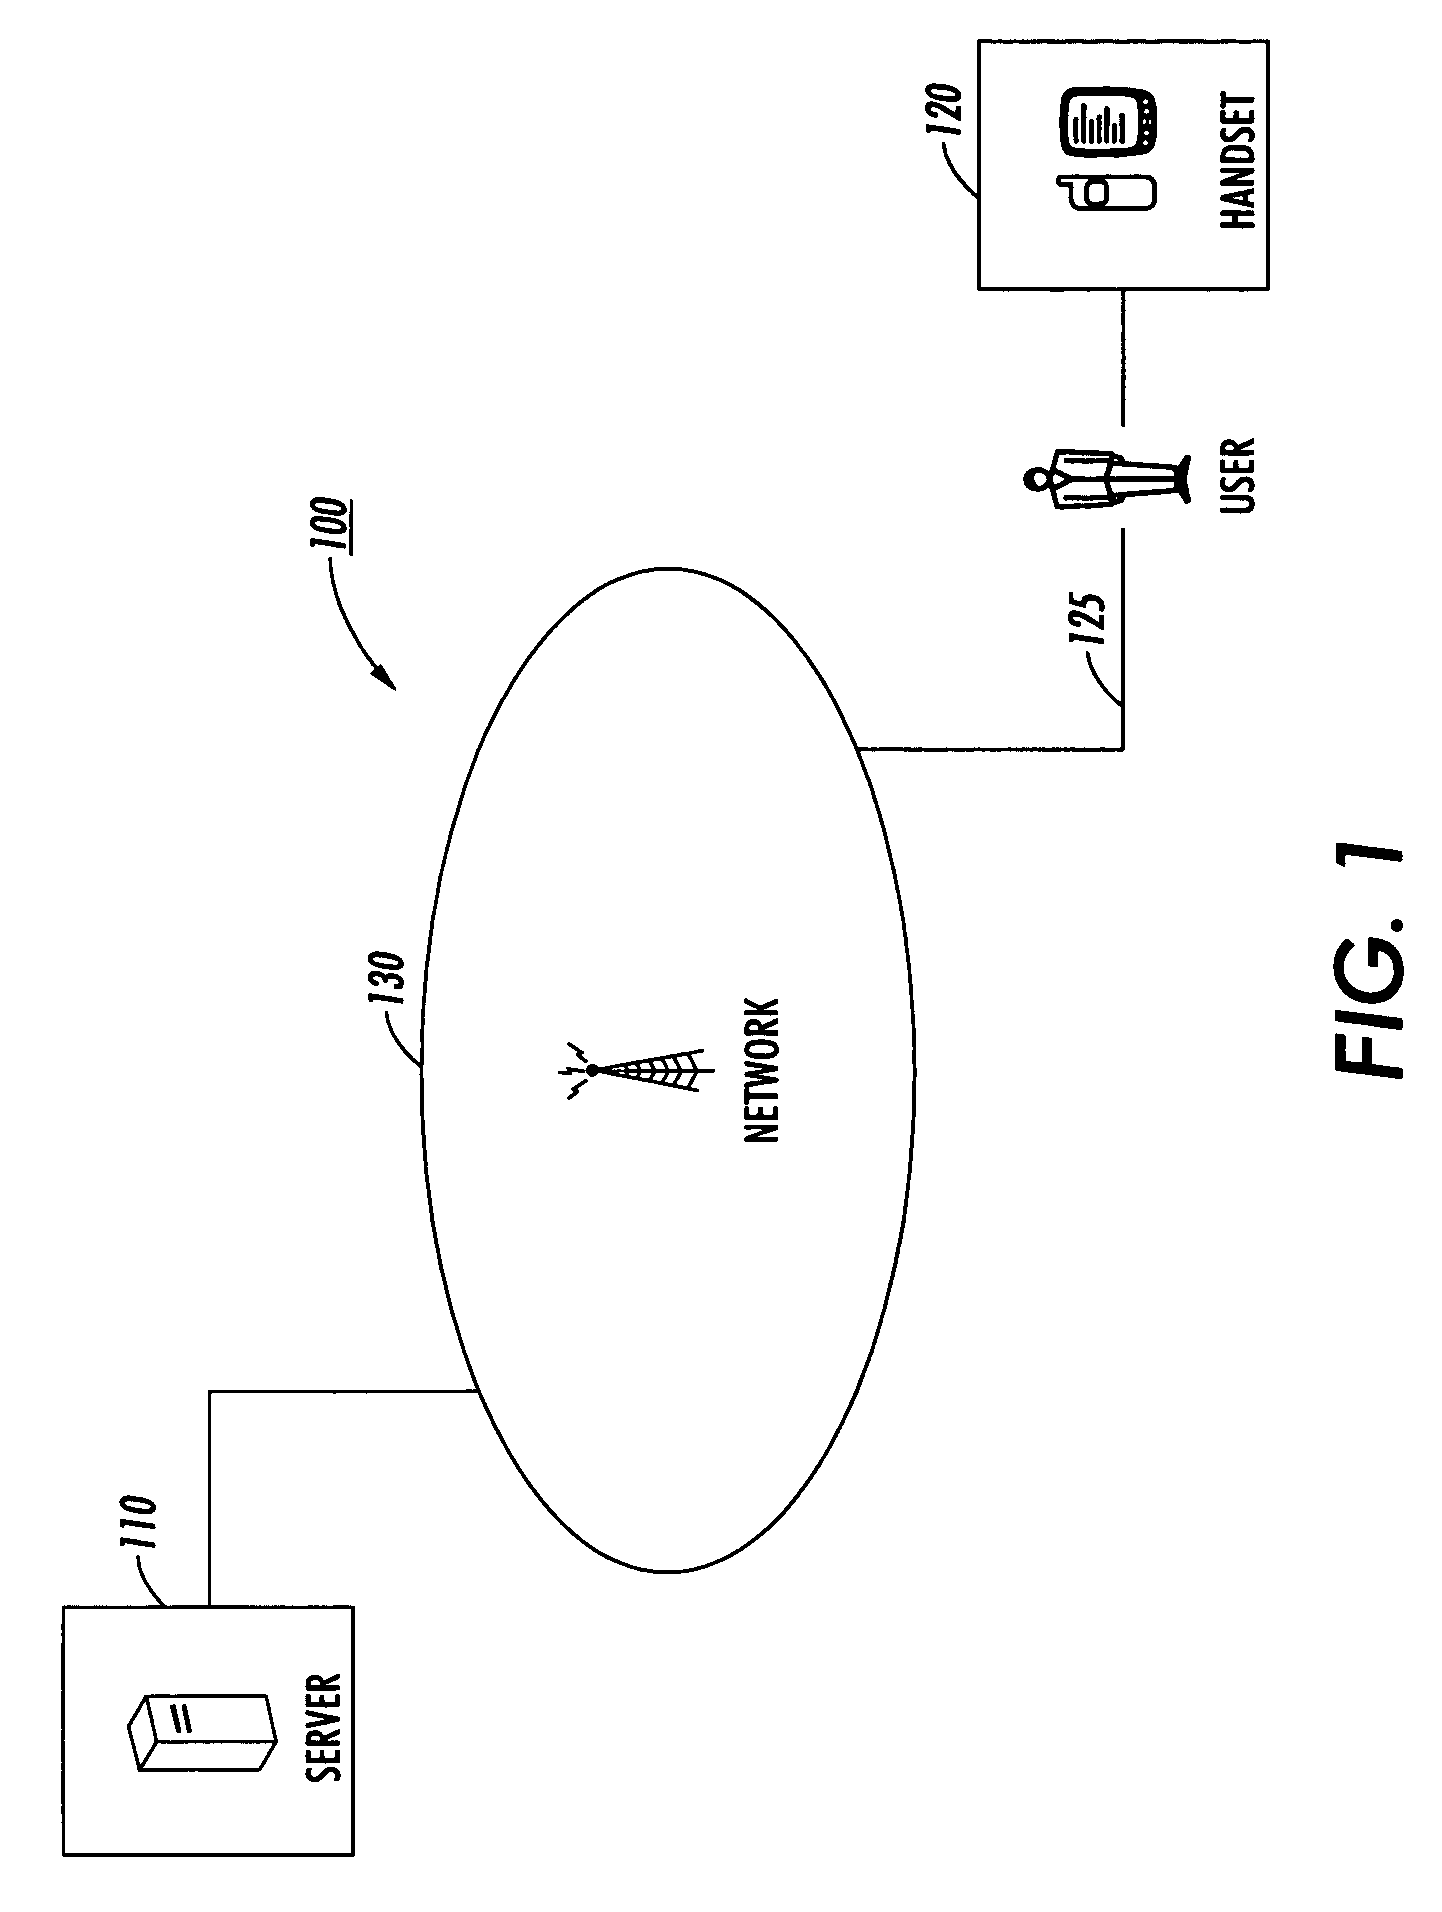 Server based image processing for client display of documents